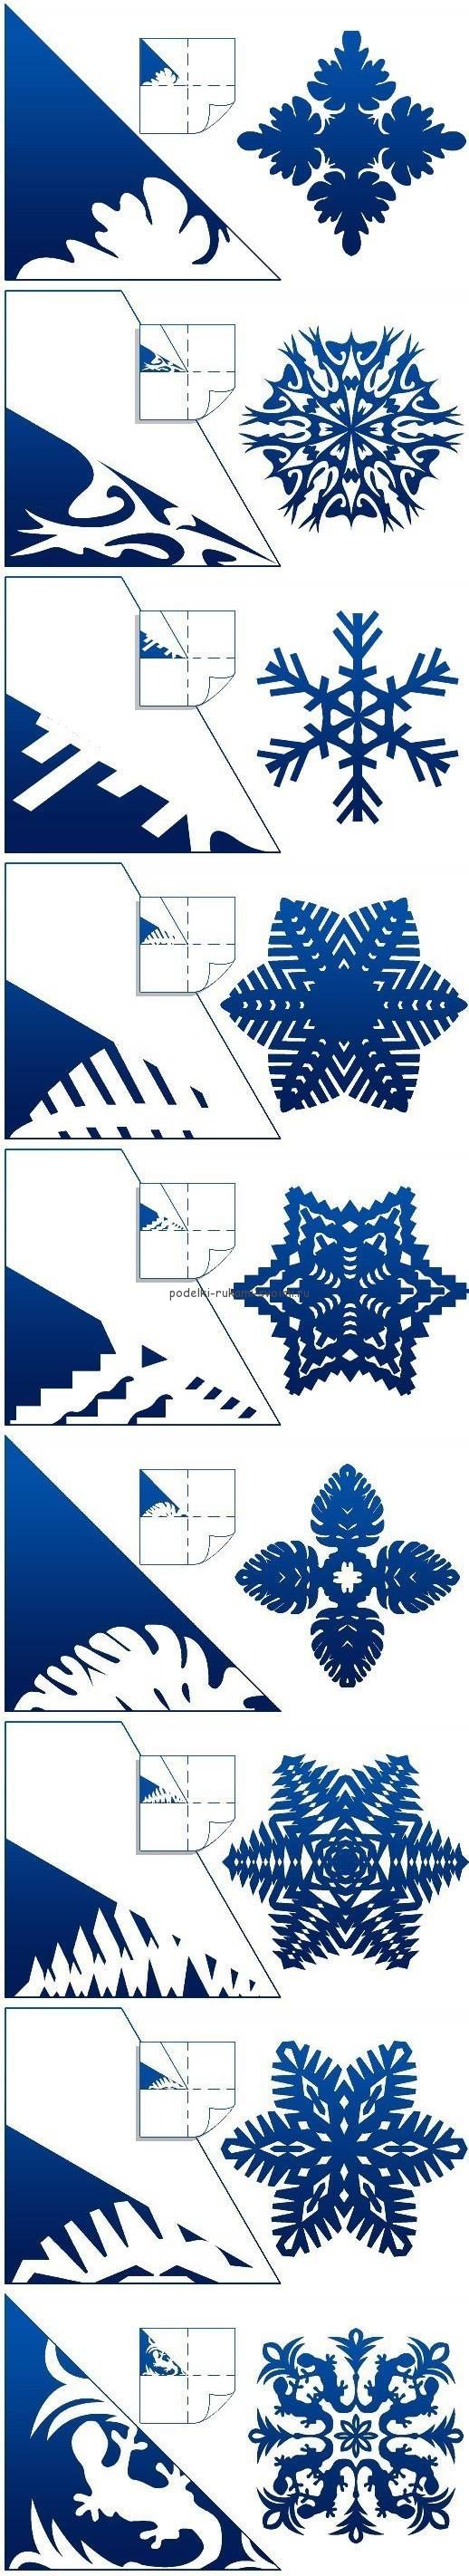 schemes for cutting beautiful snowflakes